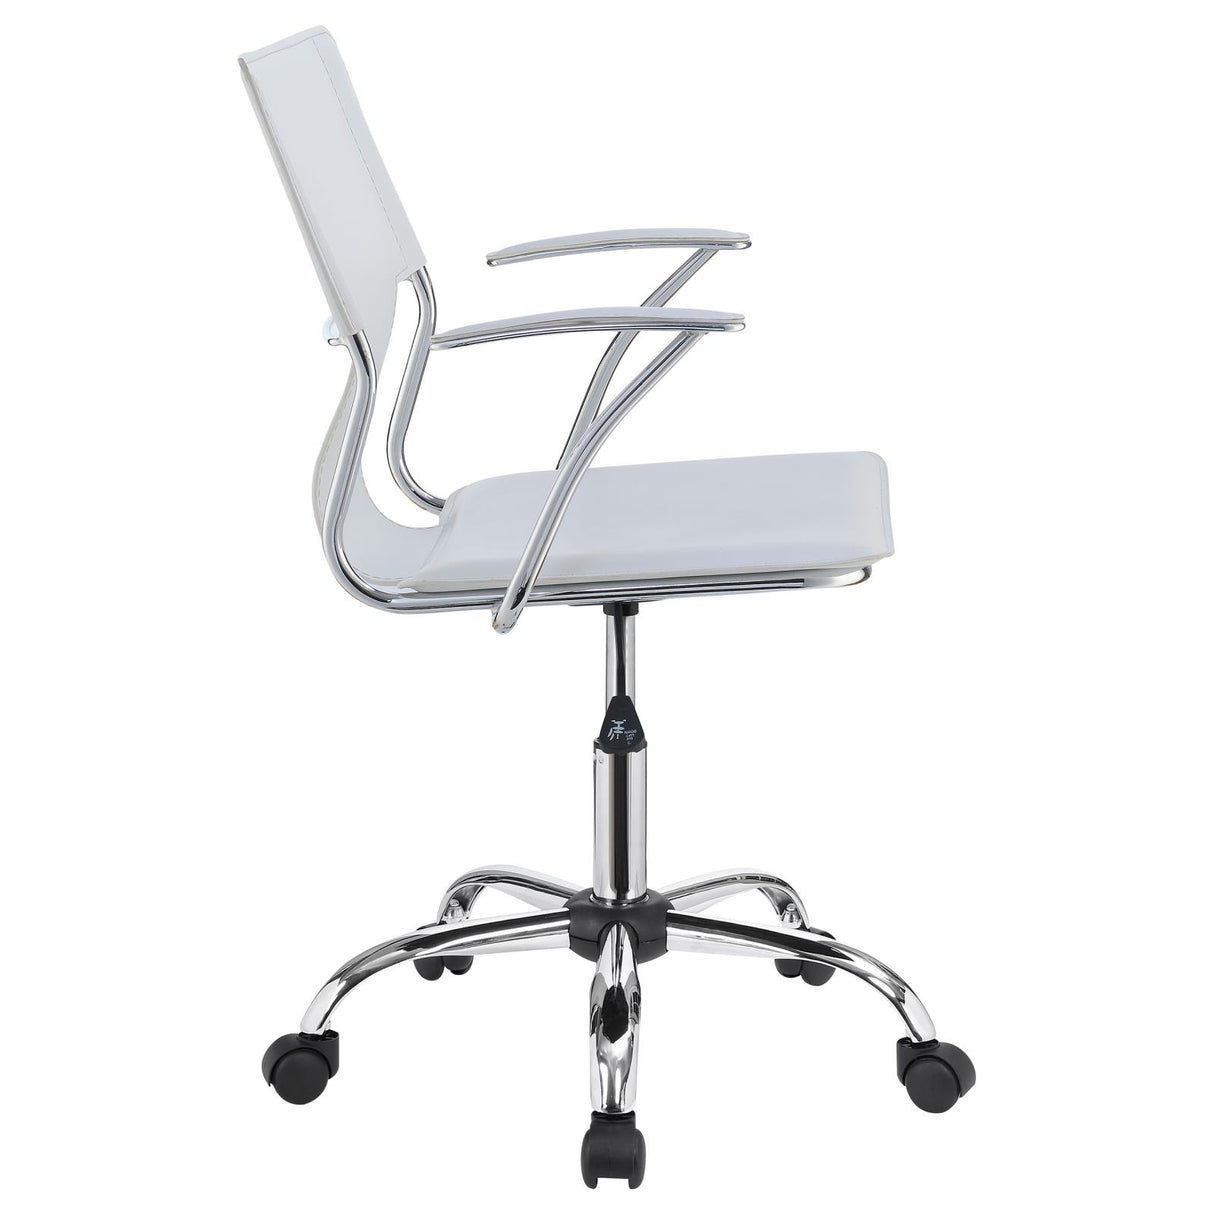 Himari Adjustable Height Office Chair White and Chrome - 801363 - Luna Furniture